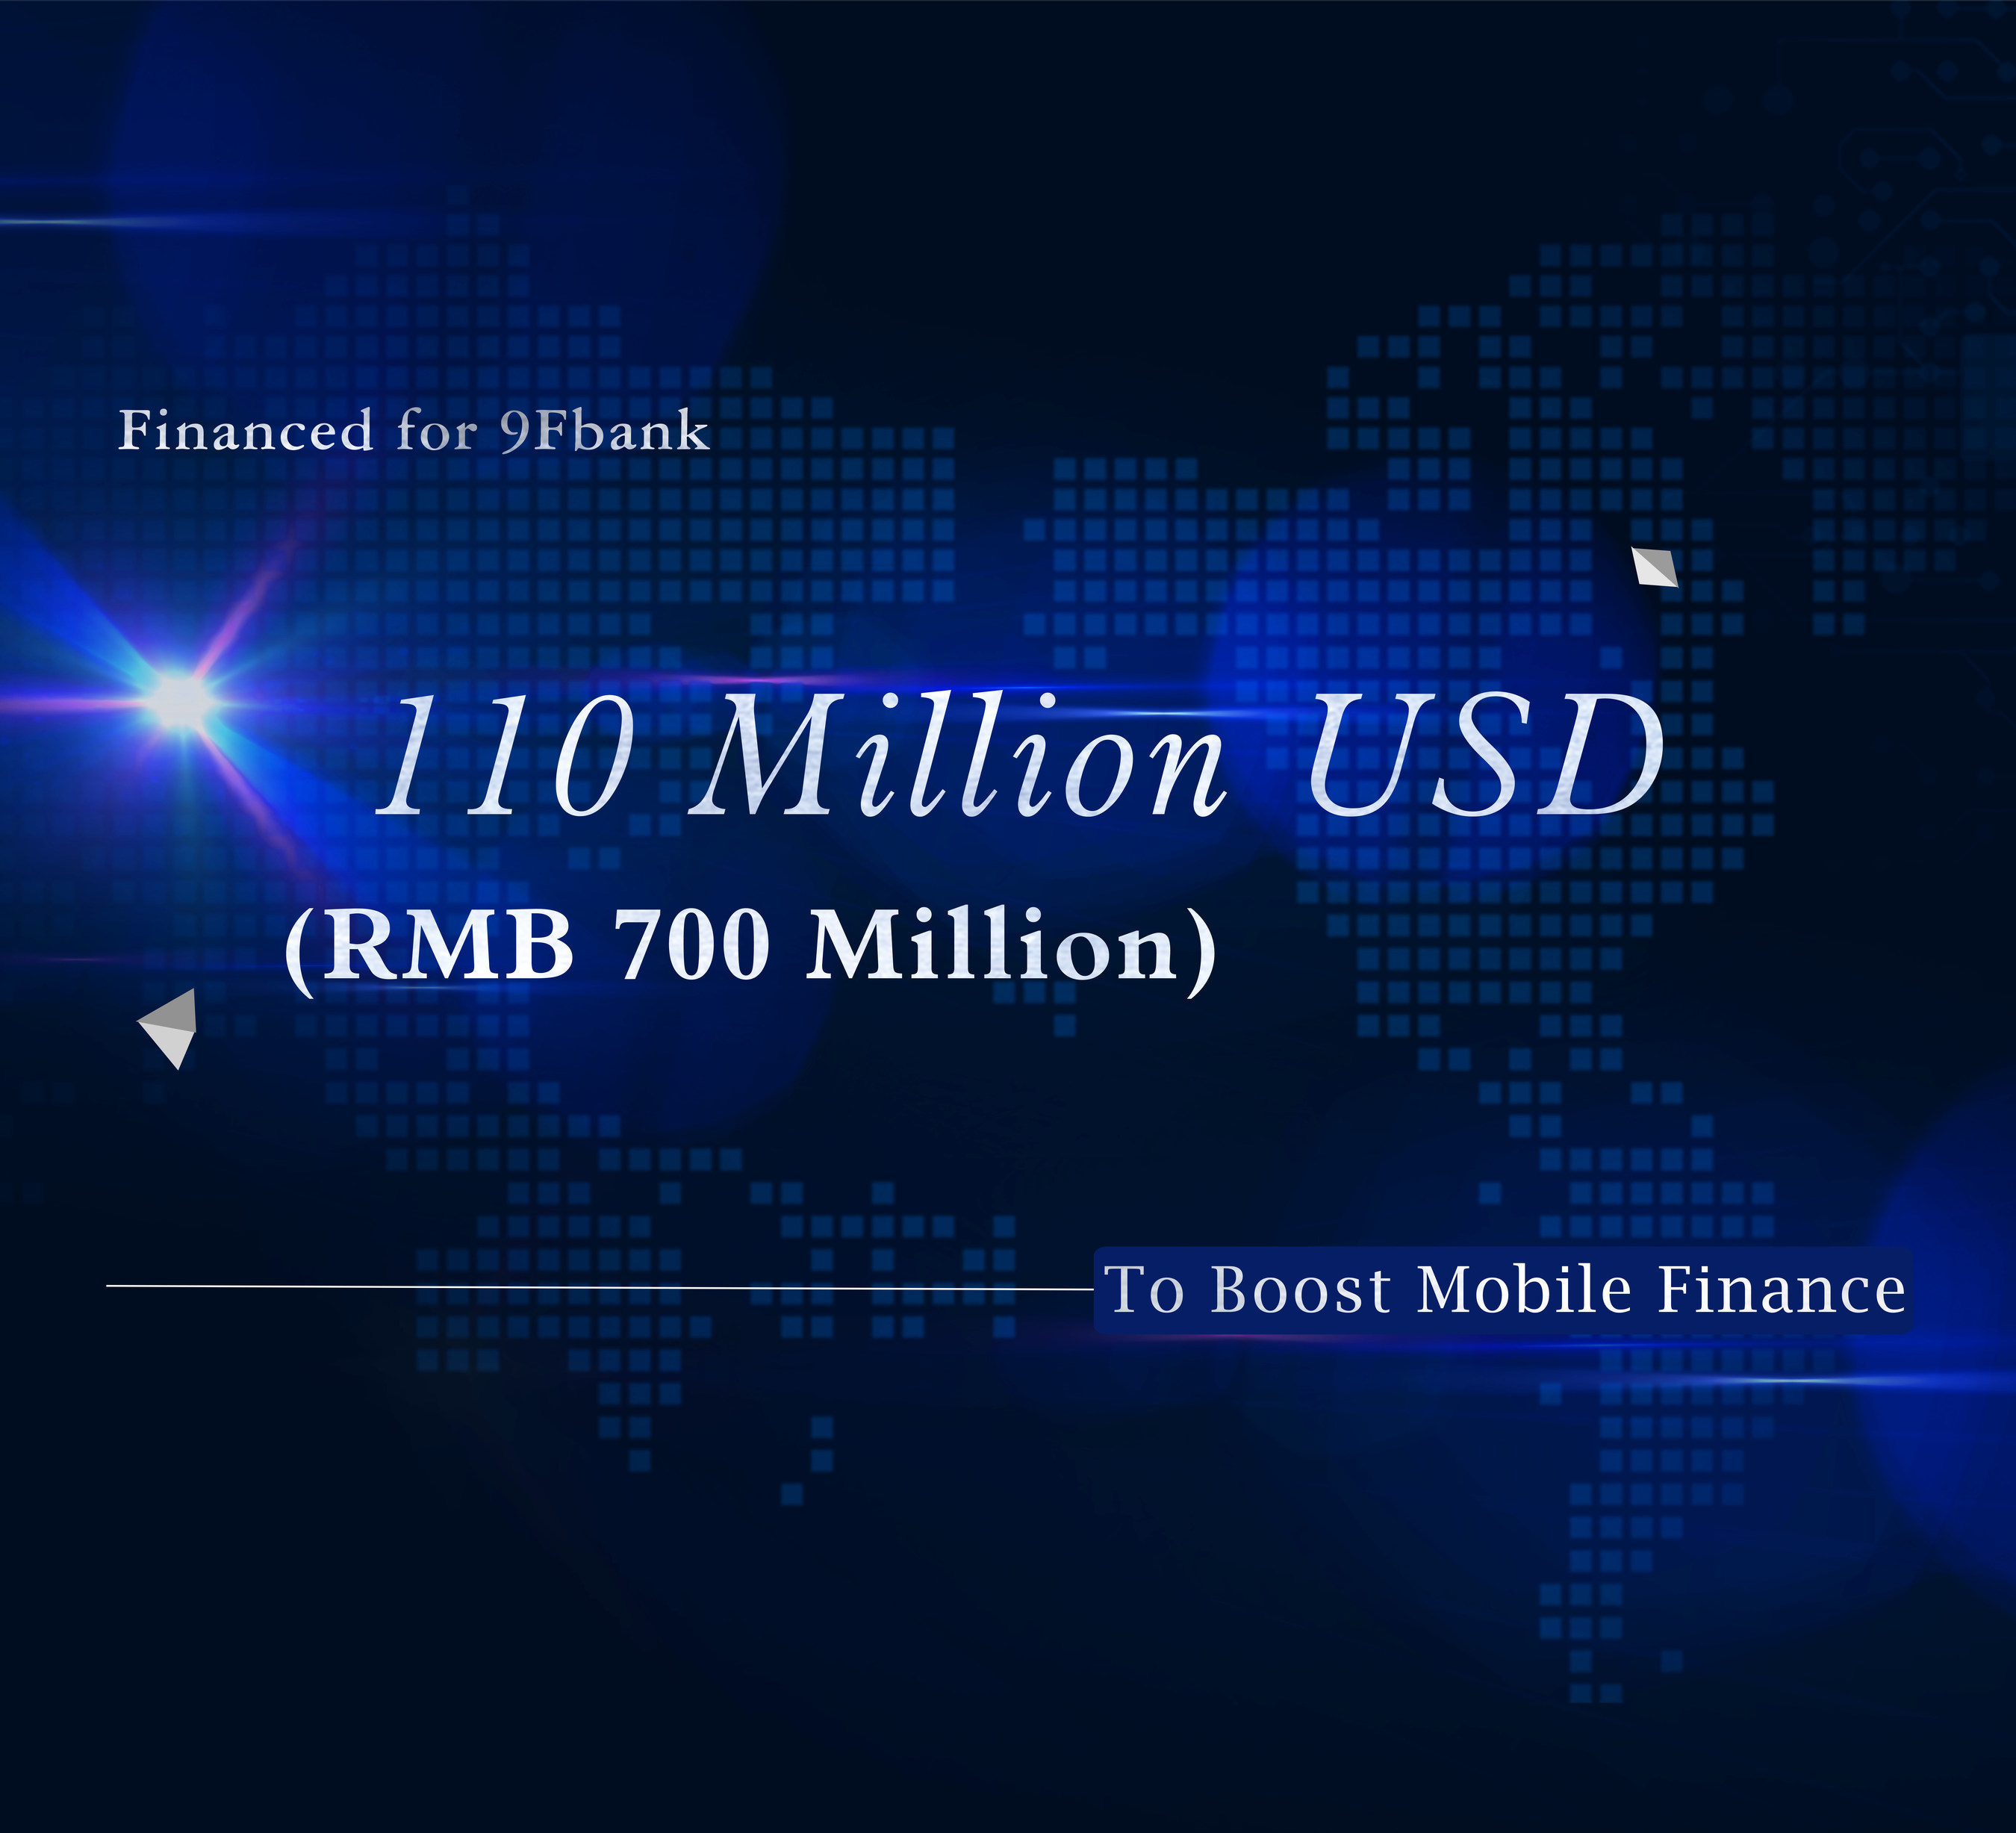 New Benchmark for 2015 -- 110 Million USD Financed for 9Fbank to Boost Mobile Finance